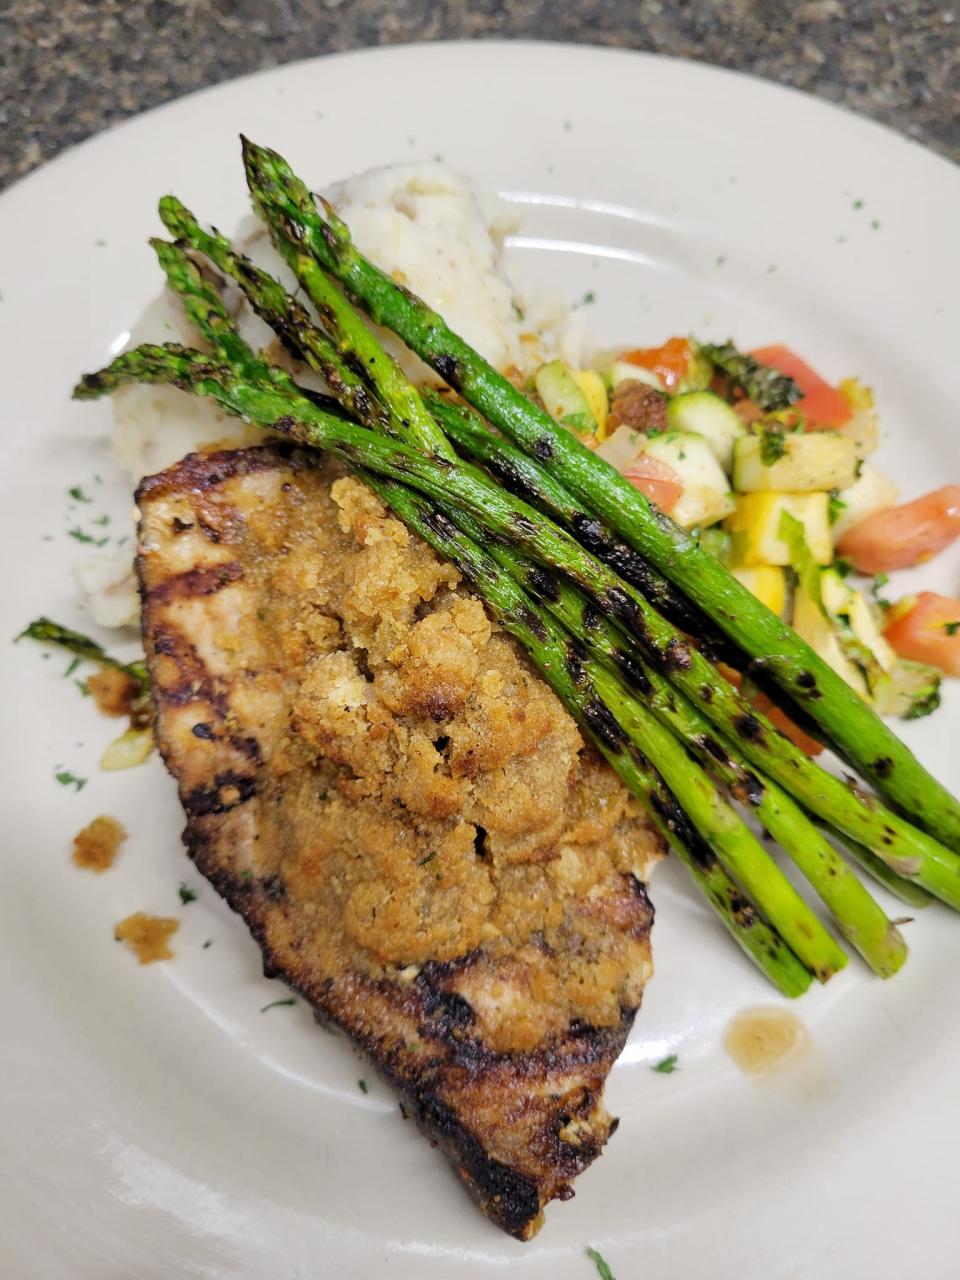 Lent special are on tap at Knuckle Heads Bar & Grill like the Italian Swordfish.